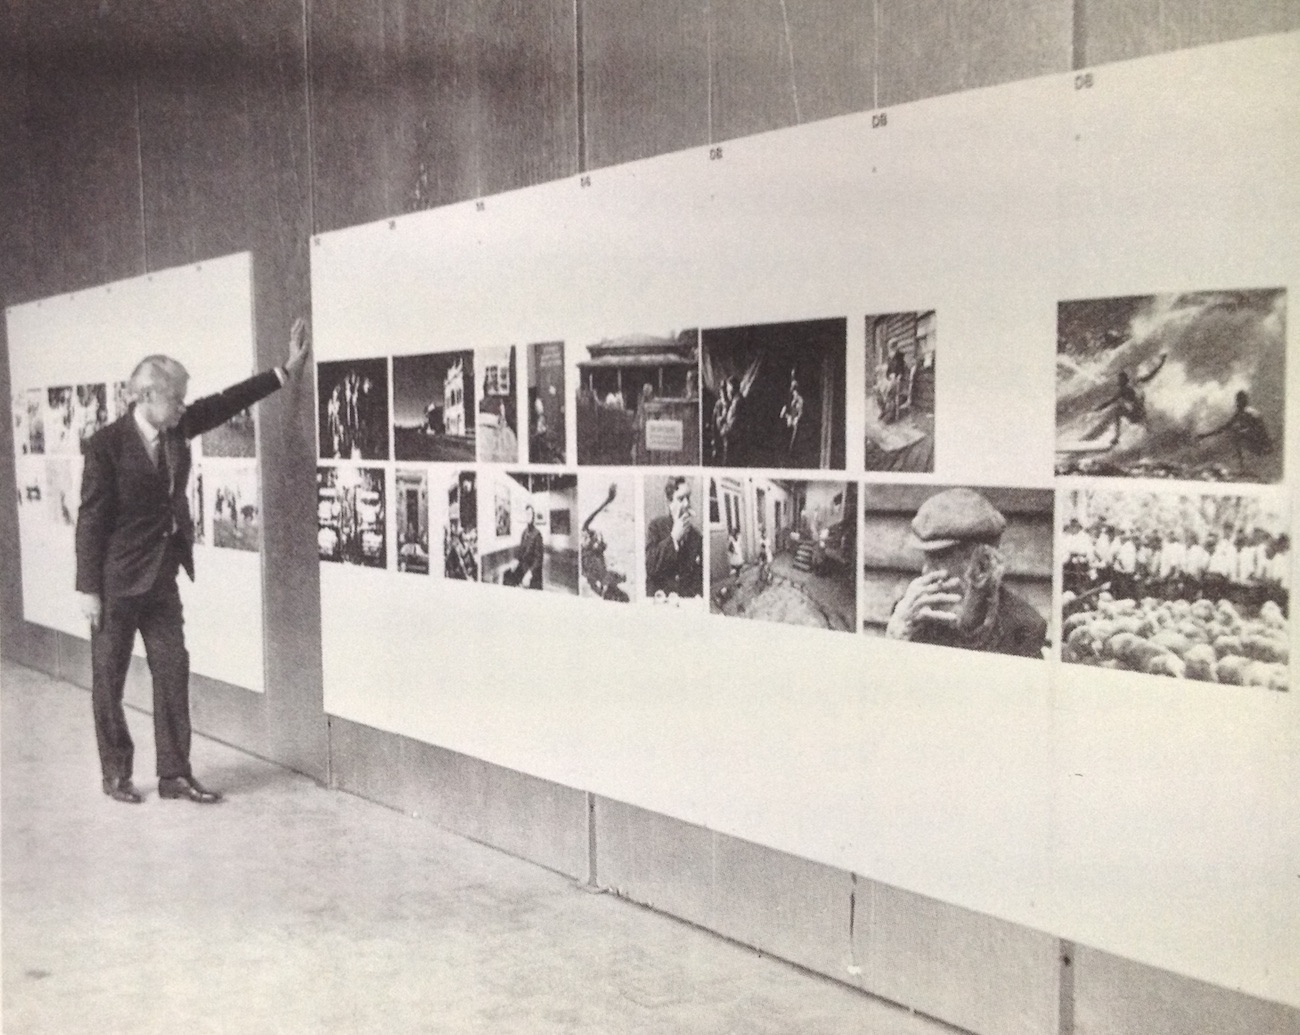 Eric Westbrook, Director of the National Gallery of Victoria, at the Perceptive Eye Exhibition Australian Women's Weekly, 7 January, 1970